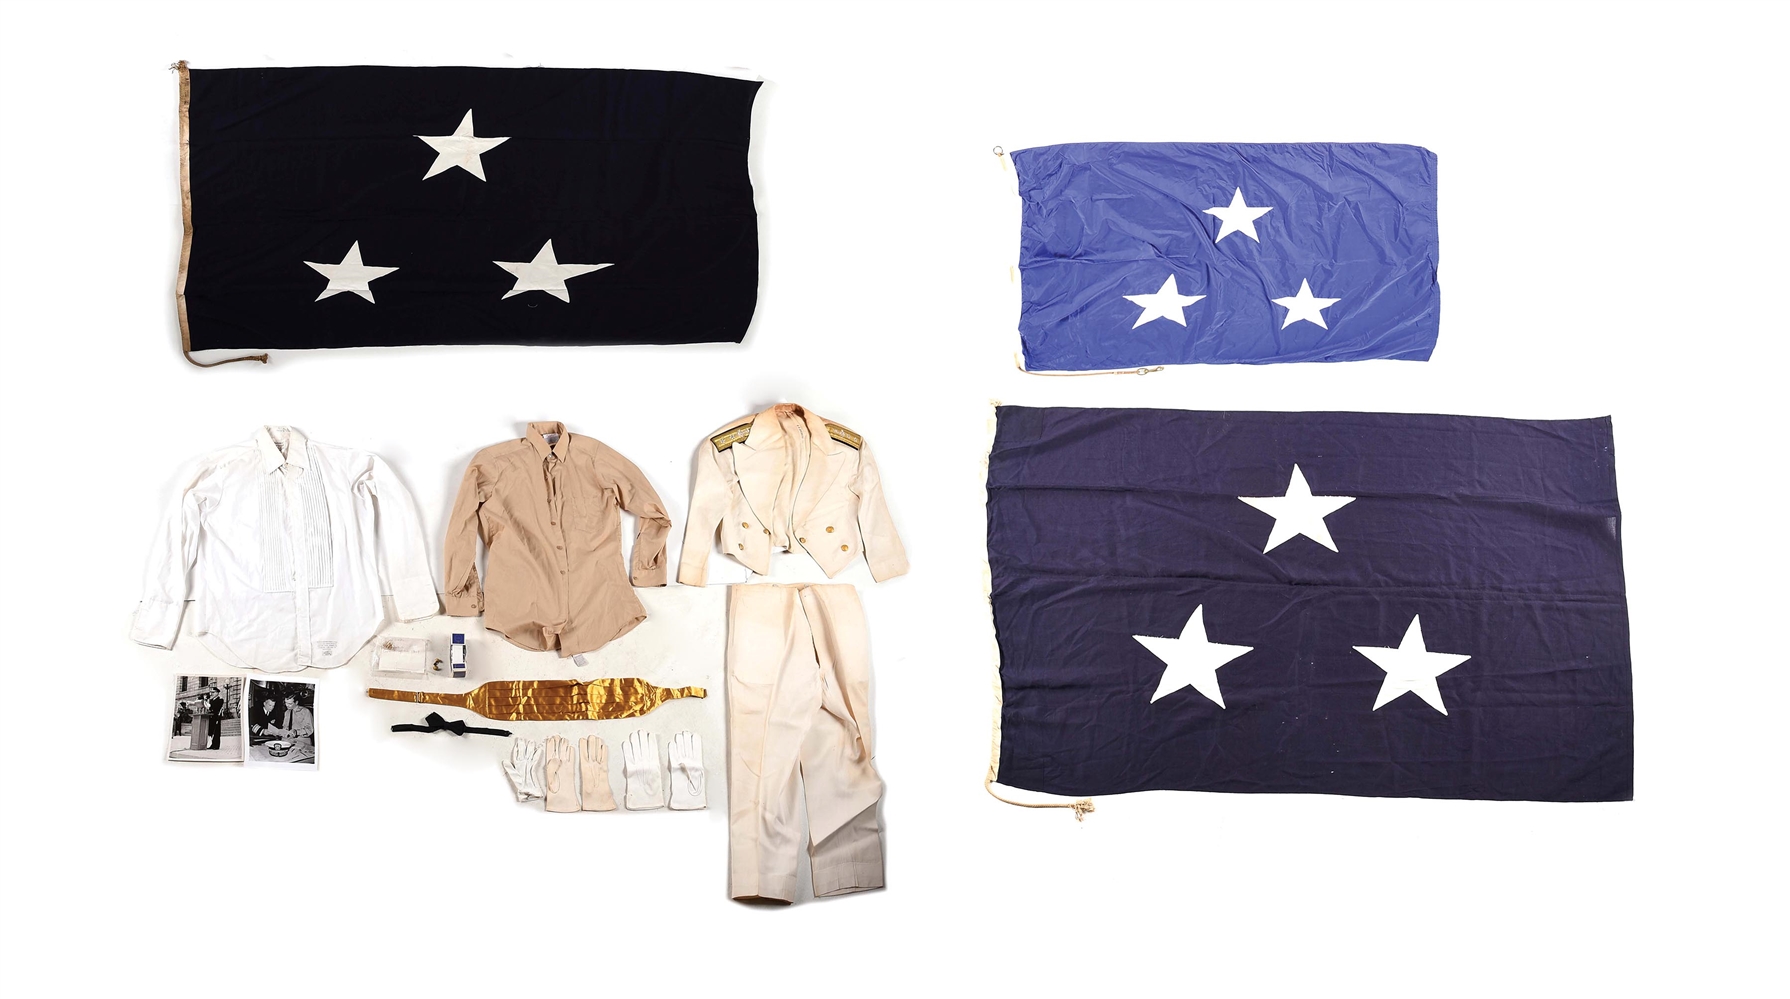 US WWII VICE ADMIRAL WILLIAM R. SMEDBERG III UNIFORM, FLAG, DOCUMENT, AND PHOTO GROUPING.